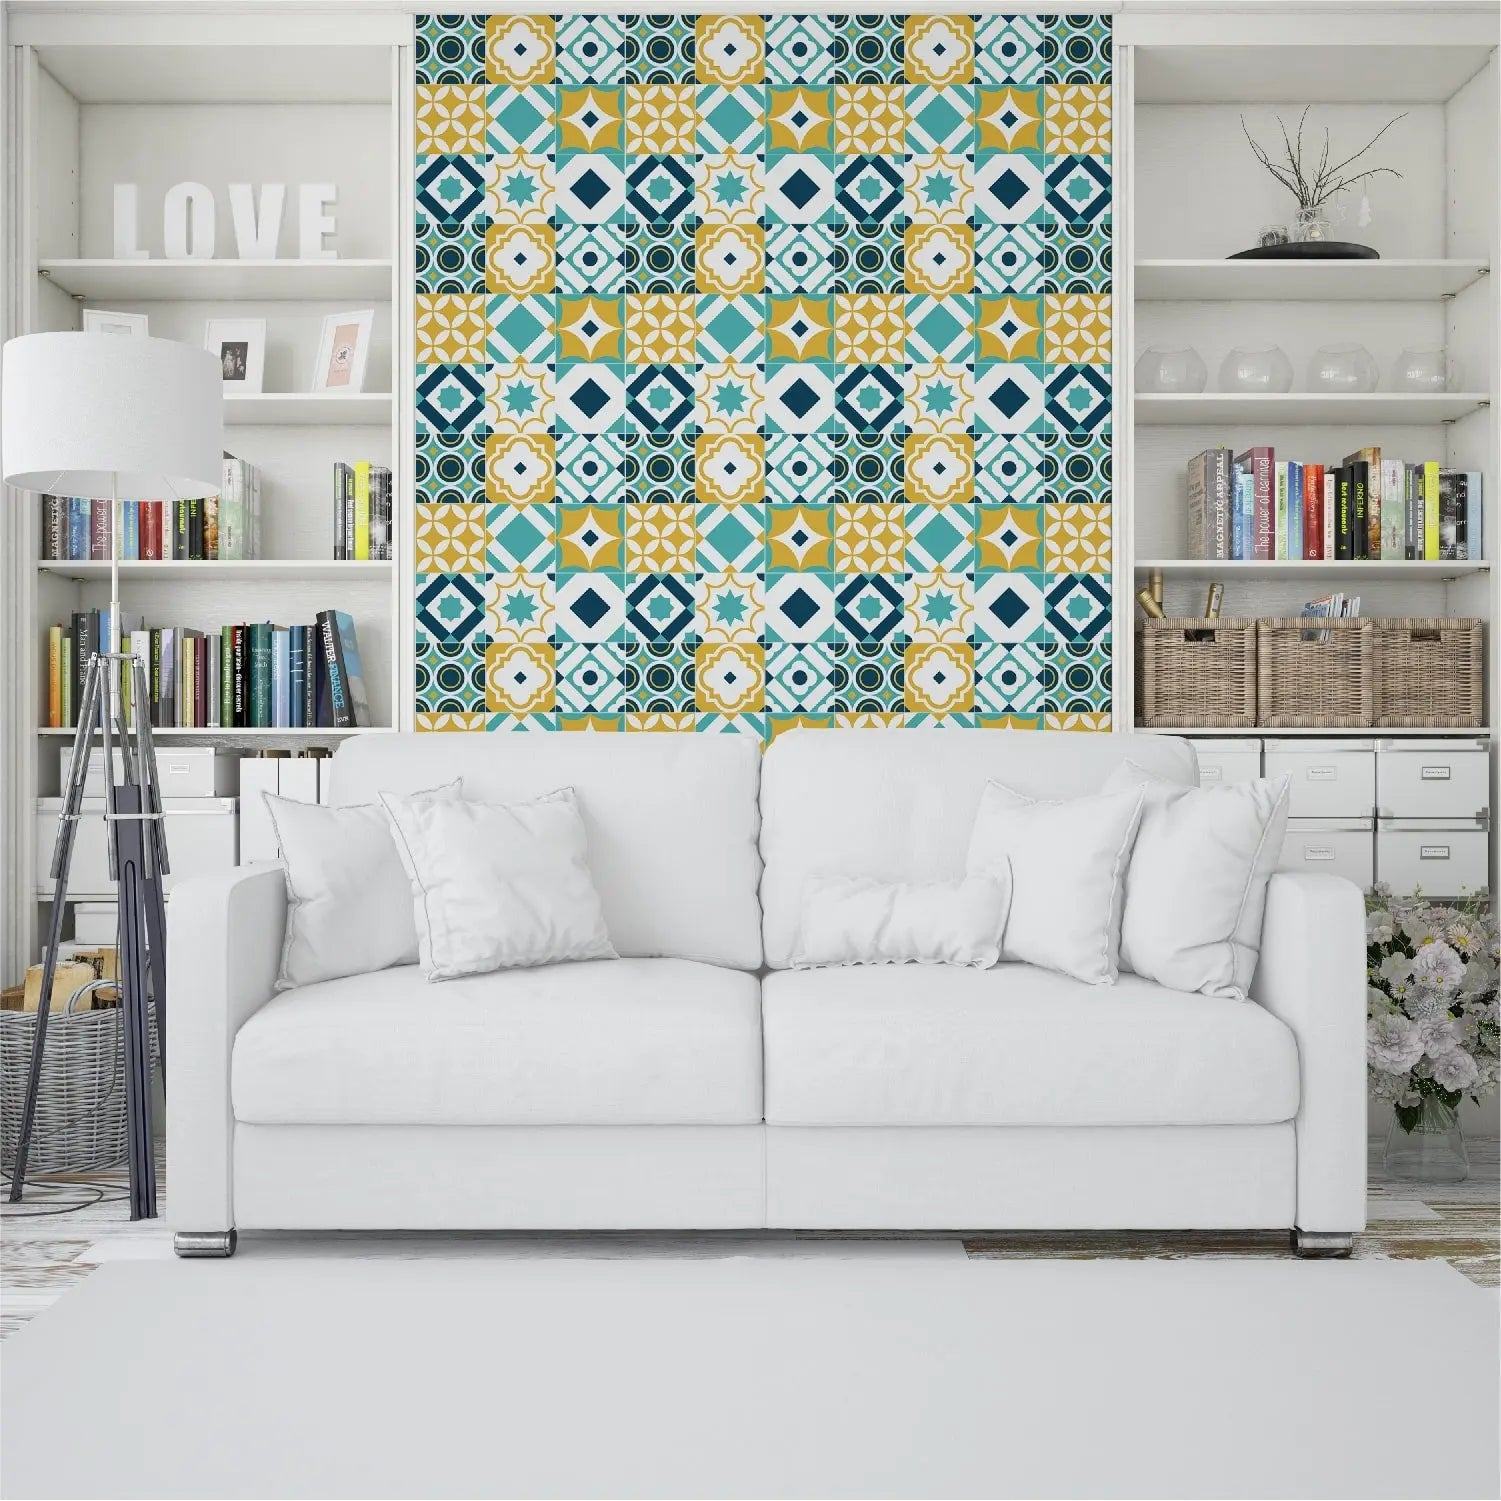 Tile Stickers Turkish Tile Stickers - Mosaicowall Mosaicowall Turkish Tile Stickers